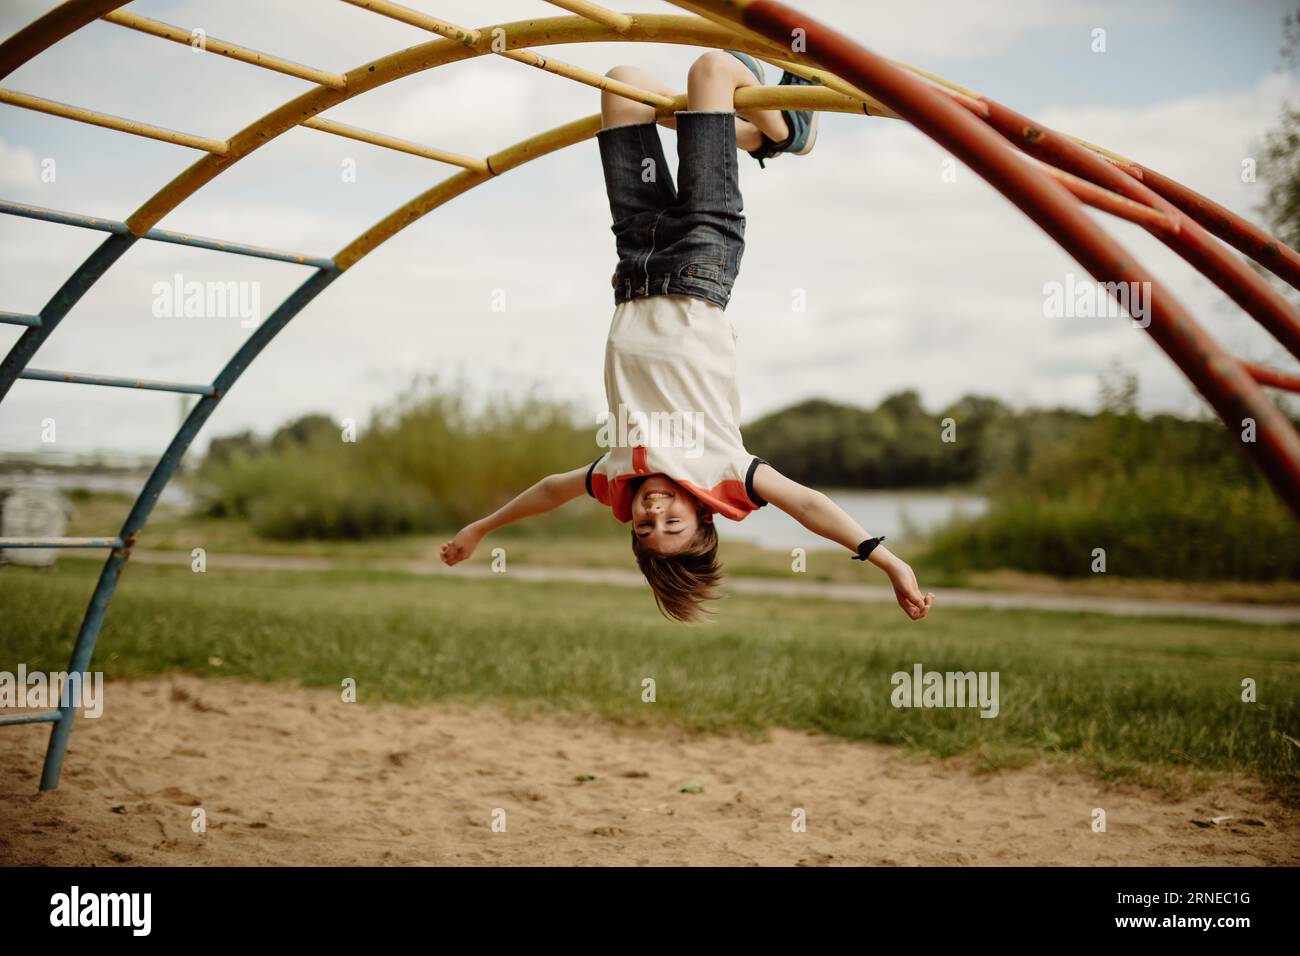 happy teen boy enjoy childhood by hanging upside down from pole of a climbing frame on playground Stock Photo